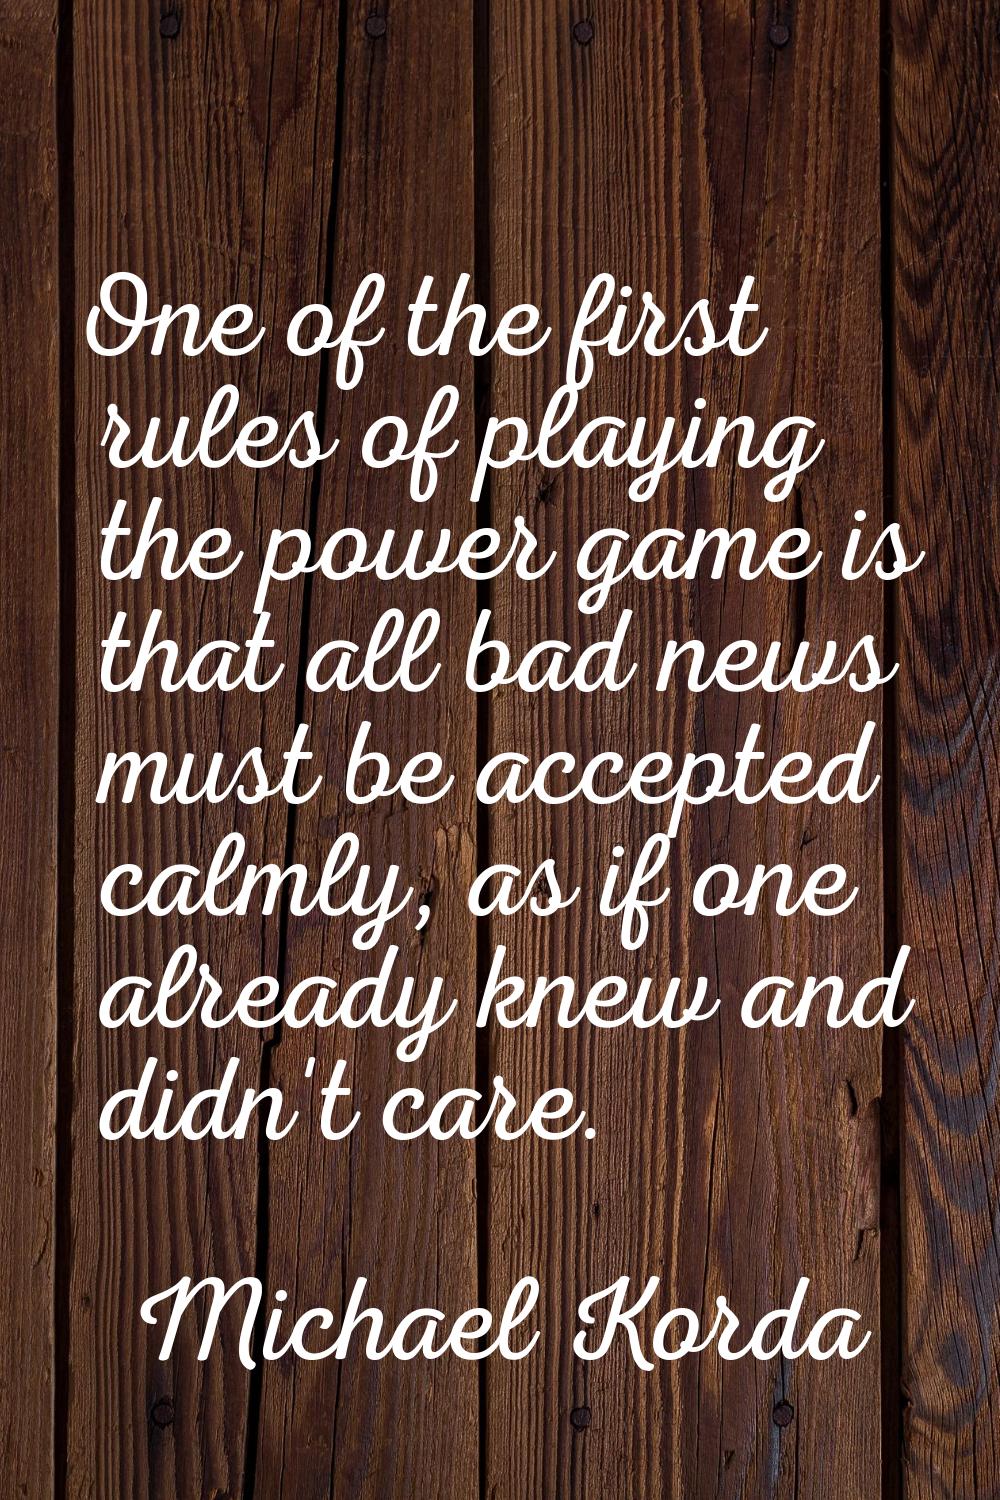 One of the first rules of playing the power game is that all bad news must be accepted calmly, as i